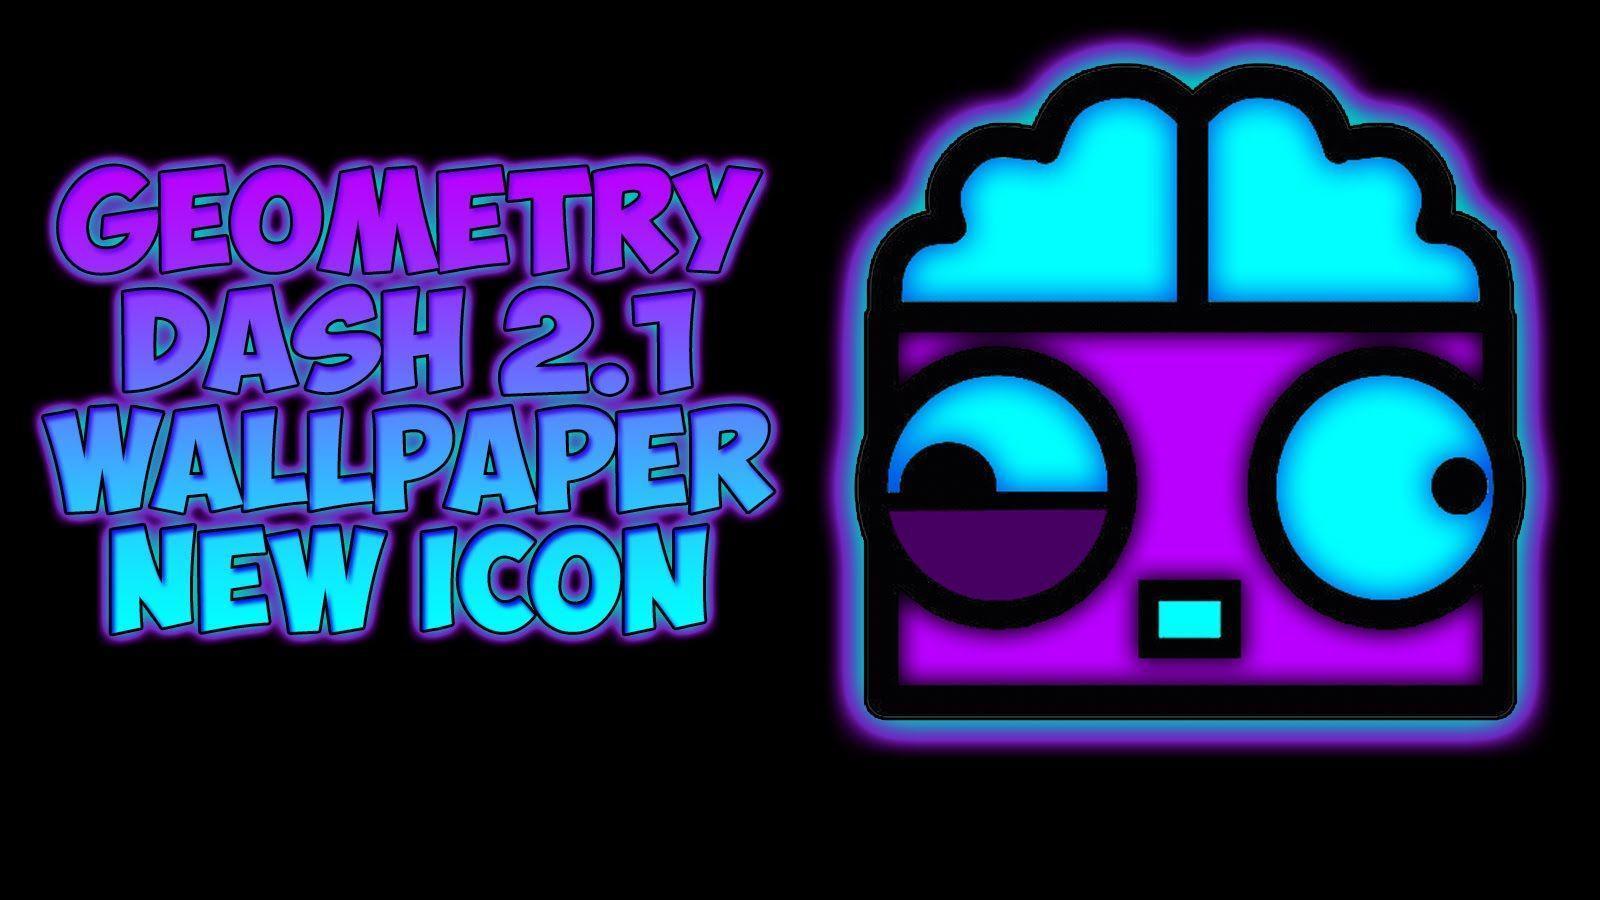 Geometry Dash 2.1 New Icon Wallpapers 7w7